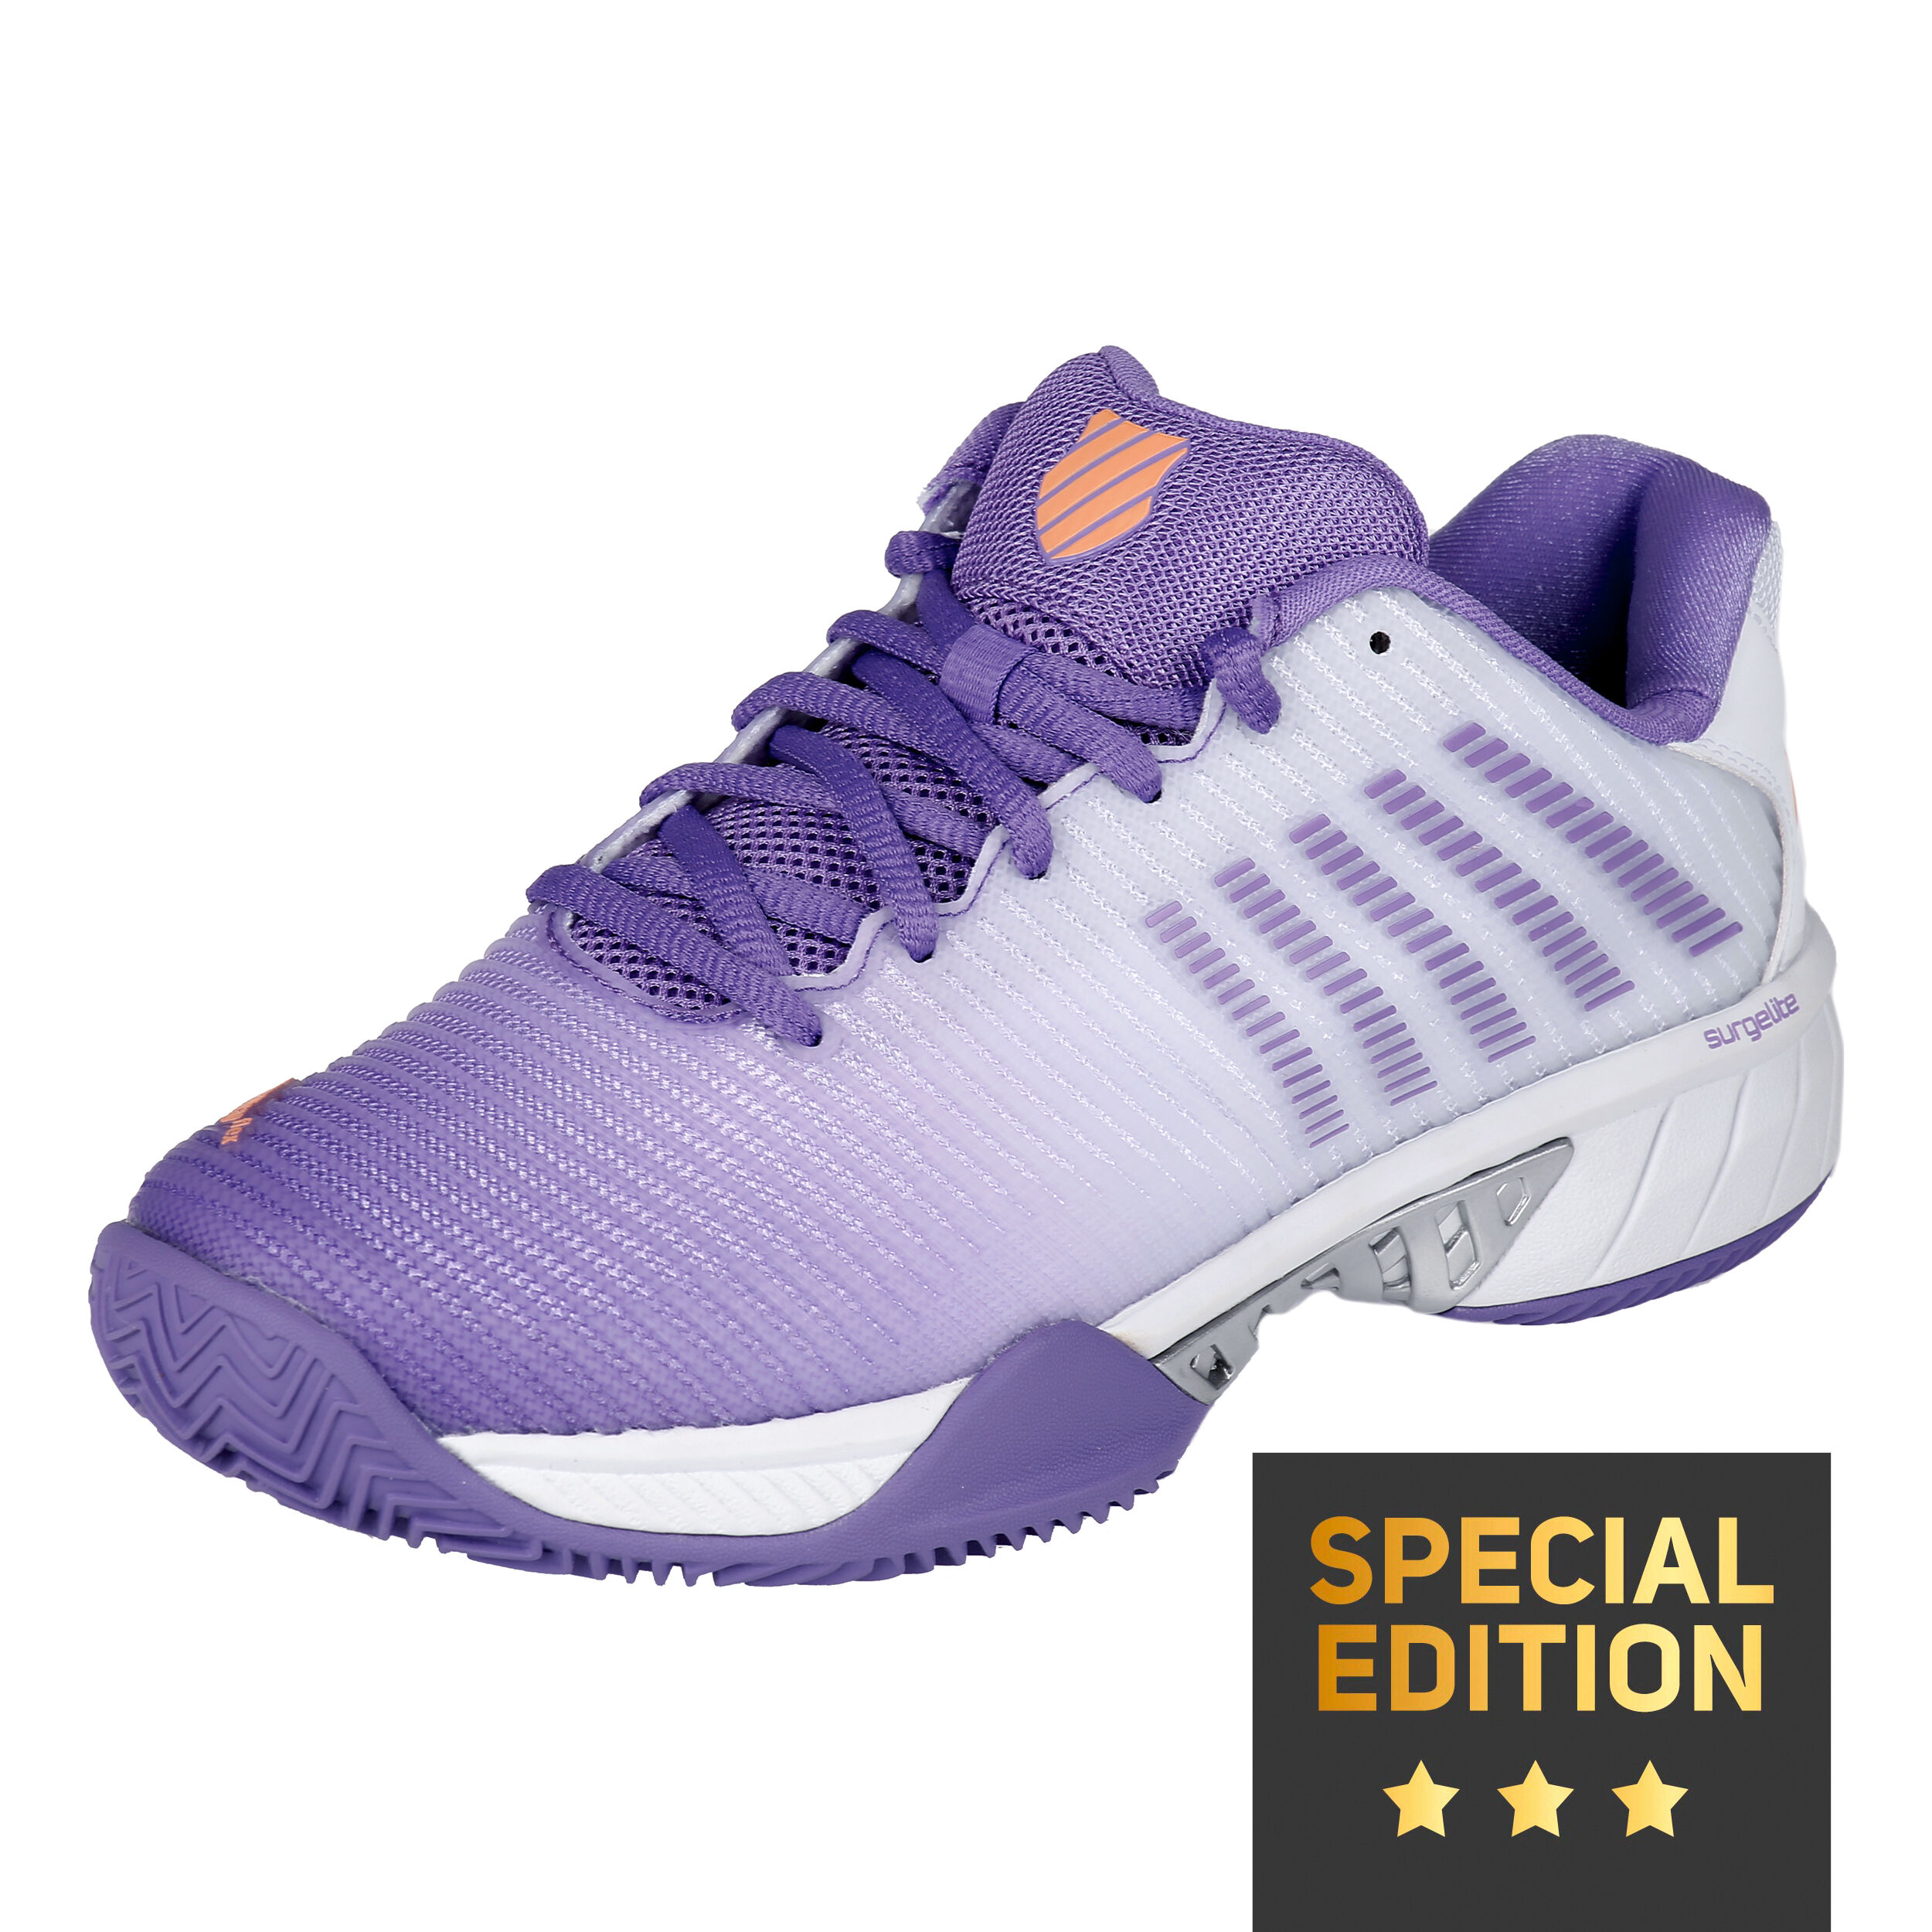 Buy Clay court shoes from K-Swiss 